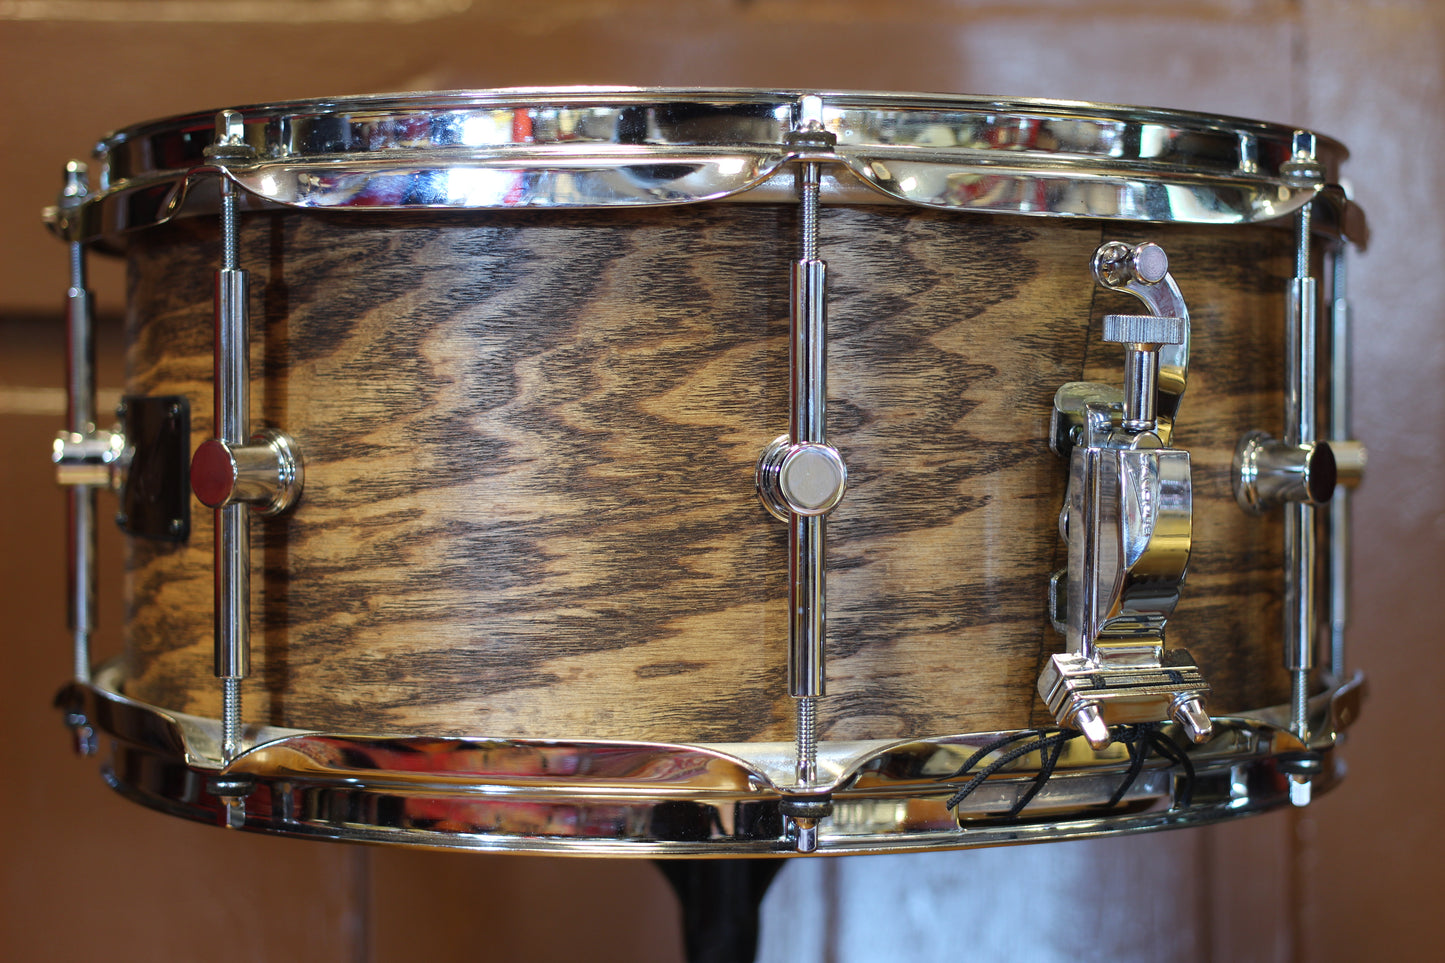 2017 Canopus Ash Snare Drum 6.5"x14" w/ Natural Oil finish